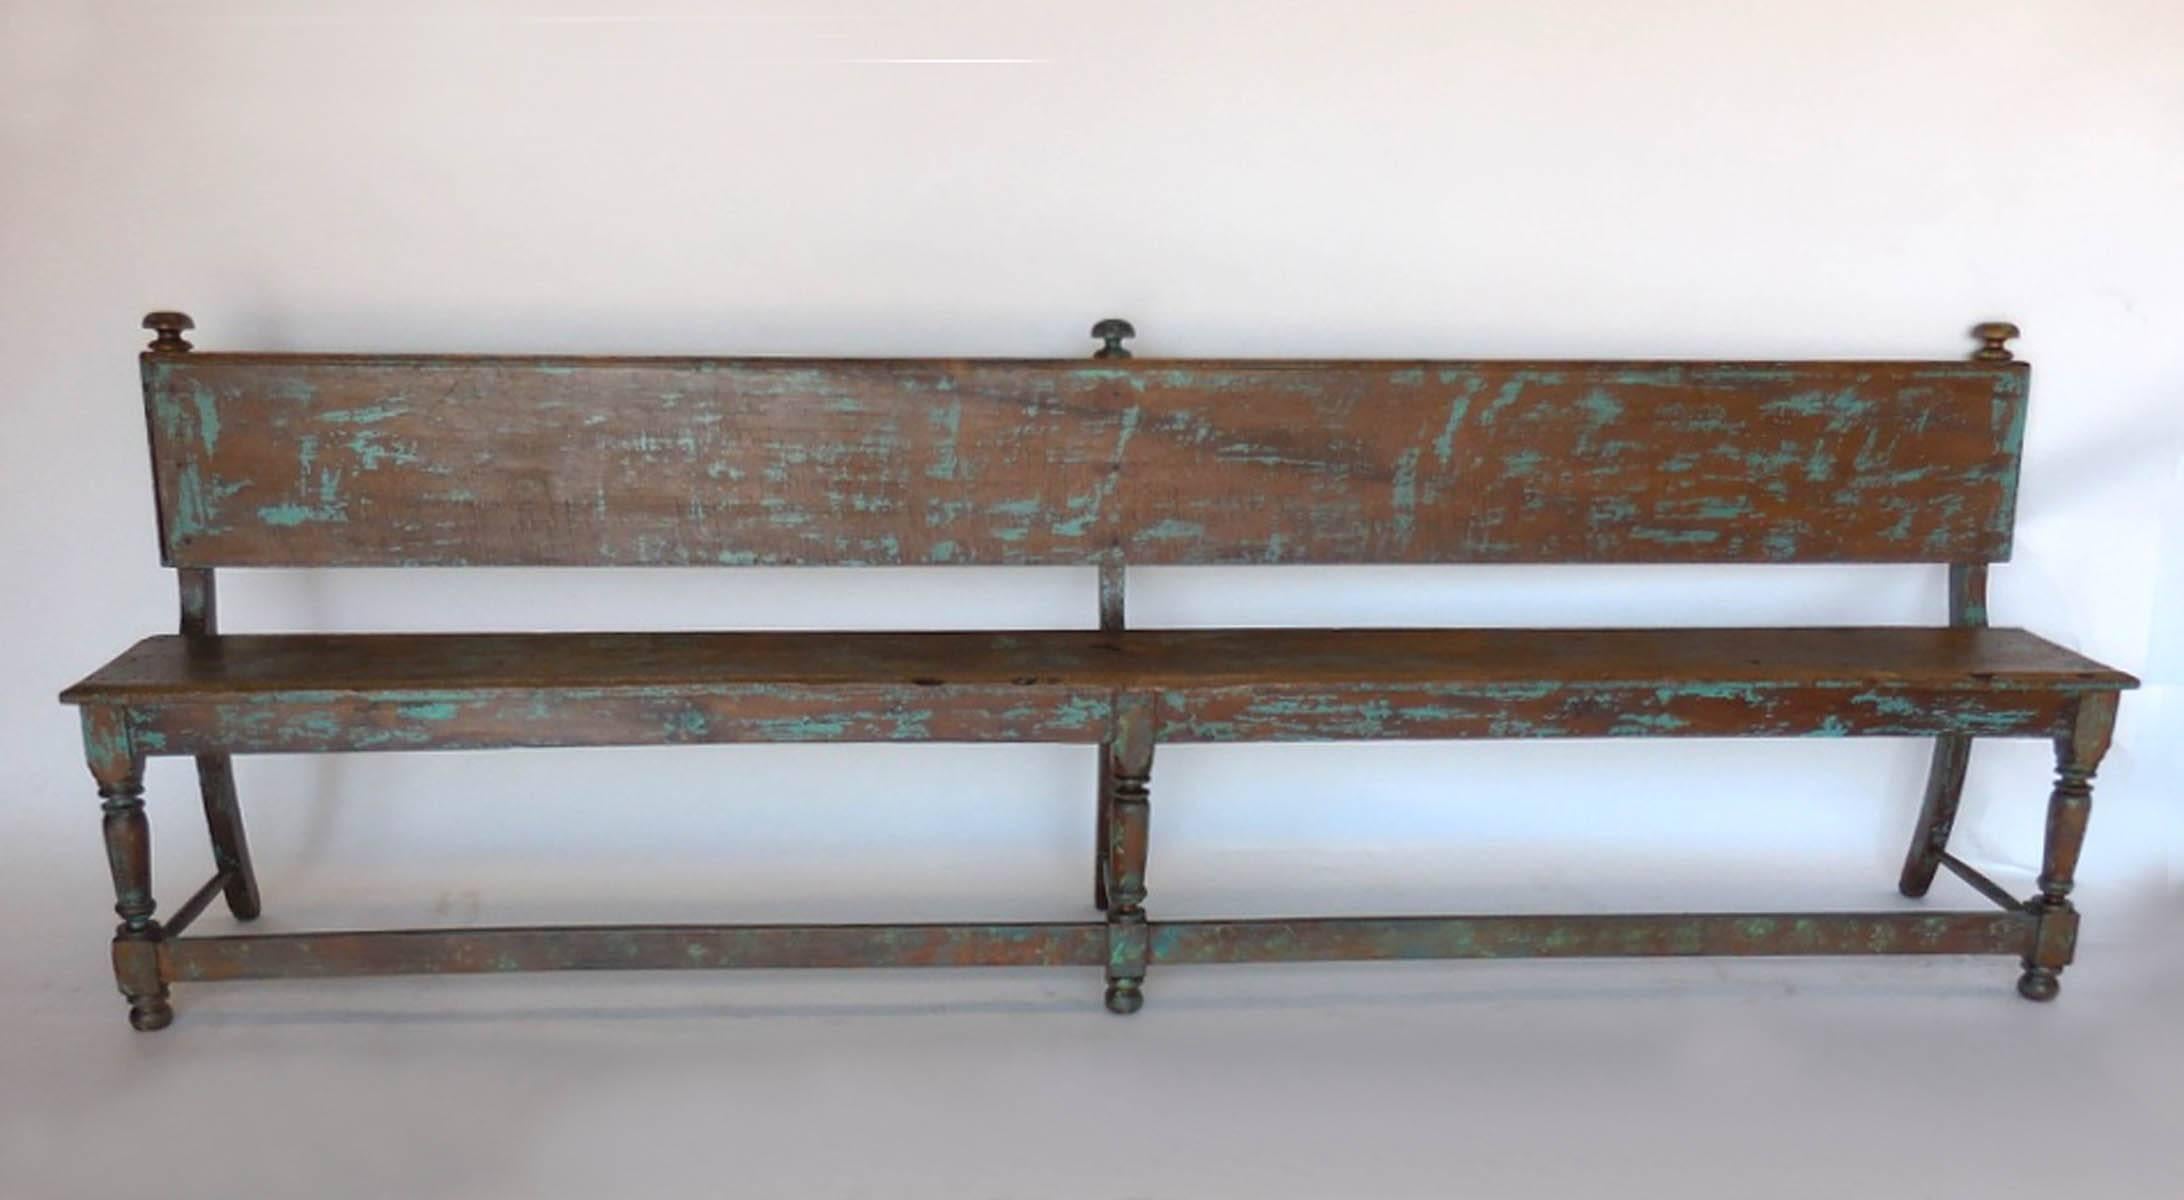 Graceful Spanish Colonial style bench with traces of old green paint. Front legs are turned, back legs are straight. Thin profile.